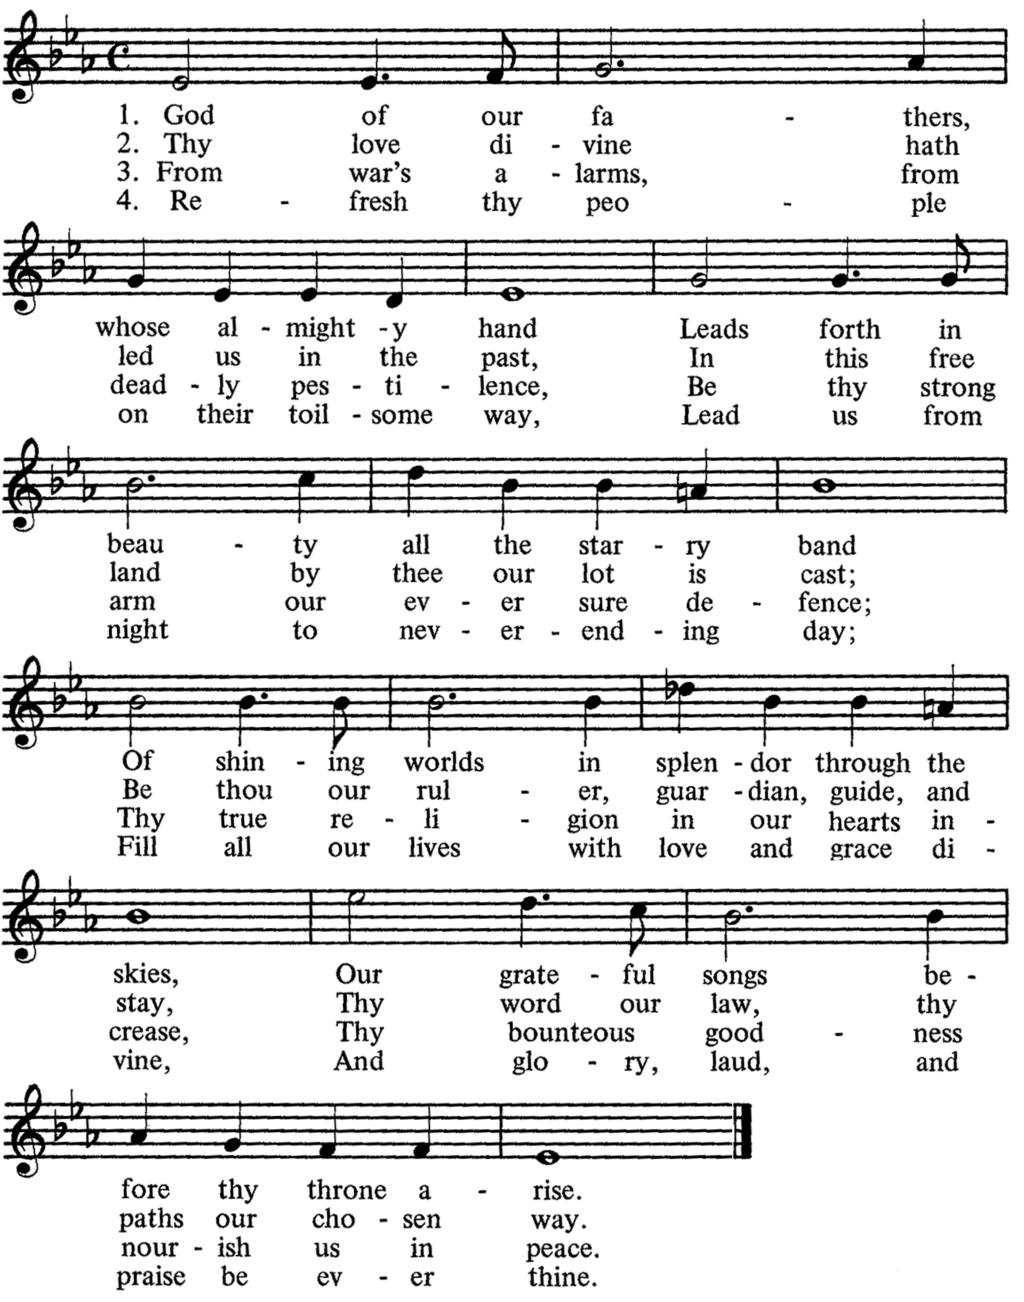 COMMUNION ANTIPHON Quam magna multitudo PSALM 31:20 Please join in the refrain below after the cantor introduction and